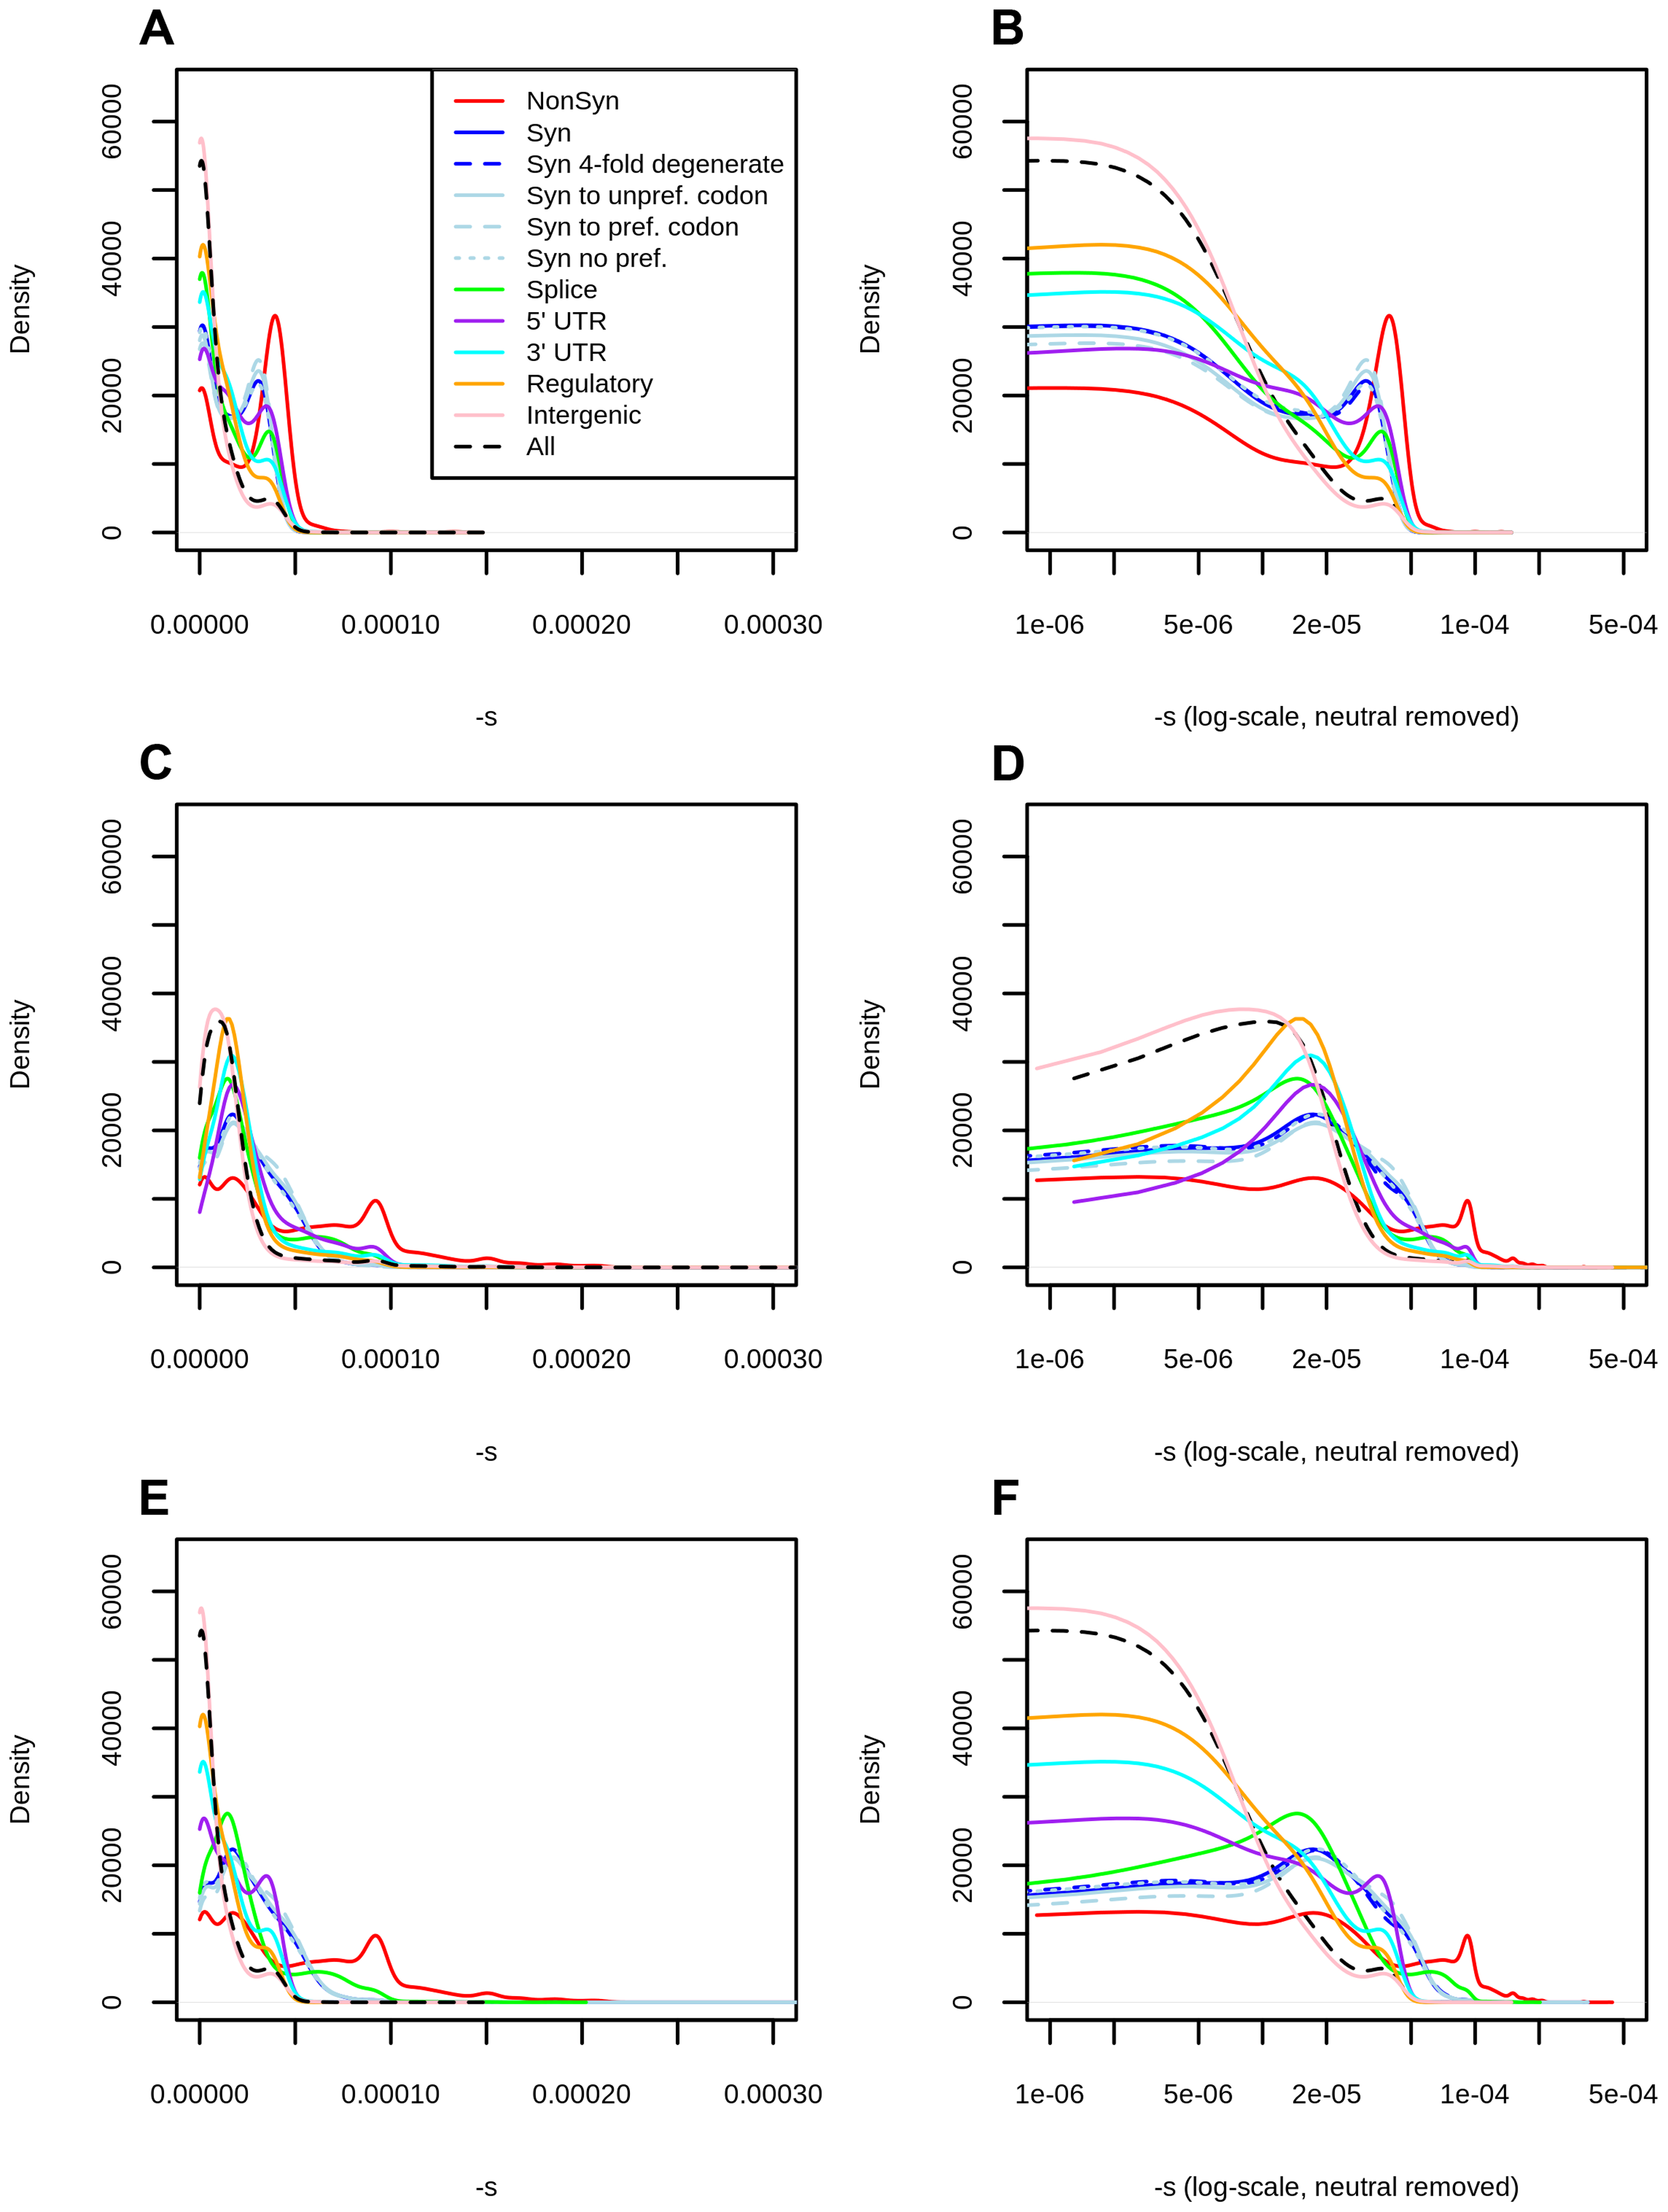 Distribution of fitness effects among YRI polymorphisms in the Complete Genomics dataset, partitioned by the genomic consequence of the mutated site. The right panels show a zoomed-in version of the distributions in the left panels, after removing neutral polymorphisms and log-scaling the x-axis. A) DFE obtained from the genome-wide mapping. B) Zoomed-in version of panel A. C) DFE obtained from the exome-wide mapping. D) Zoomed-in version of panel C. E) DFEs for exonic sites (nonsynonymous, synonymous, splice sites) obtained from the exome-wide mapping and DFEs for non-exonic sites (intergenic, UTR, regulatory) obtained from the genome-wide mapping. F) Zoomed-in version of panel E. Consequences were determined using the Ensembl Variant Effect Predictor (v.2.5). Codon and degeneracy information was obtained from snpEff. If more than one consequence existed for a given SNP, that SNP was assigned to the most severe of the predicted categories, following the VEP's hierarchy of consequences. NonSyn = nonsynonymous. Syn = synonymous. Syn to unpref. codon = synonymous change from a preferred to an unpreferred codon. Syn to pref. codon = synonymous change from an unpreferred to a preferred codon. Syn no pref. = synonymous change from an unpreferred codon to a codon that is also unpreferred. Splice = splice site. Figure and caption from [Racimo and Schraiber (2014)](https://doi.org/10.1371/journal.pgen.1004697). https://doi.org/10.1371/journal.pgen.1004697.g002